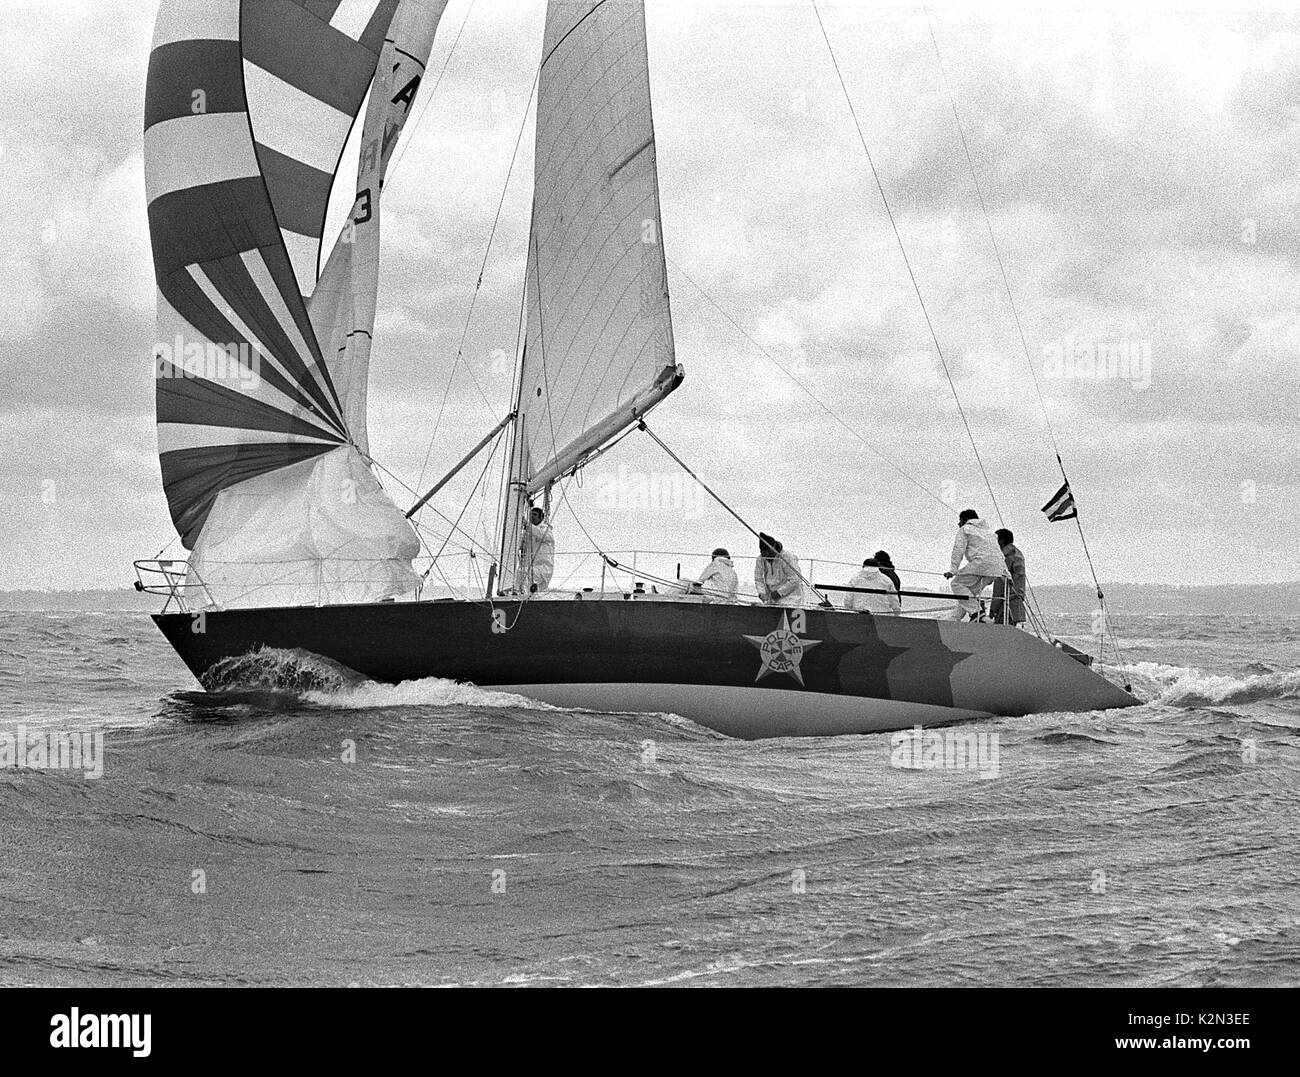 AJAXNETPHOTO. 1979. SOLENT, ENGLAND. - ADMIRAL'S CUP SOLENT INSHORE RACE - POLICE CAR - AUSTRALIA, SKIPPERED BY PETER CANTWELL. PHOTO:JONATHAN EASTLAND/AJAX REF:79 2005 Stock Photo